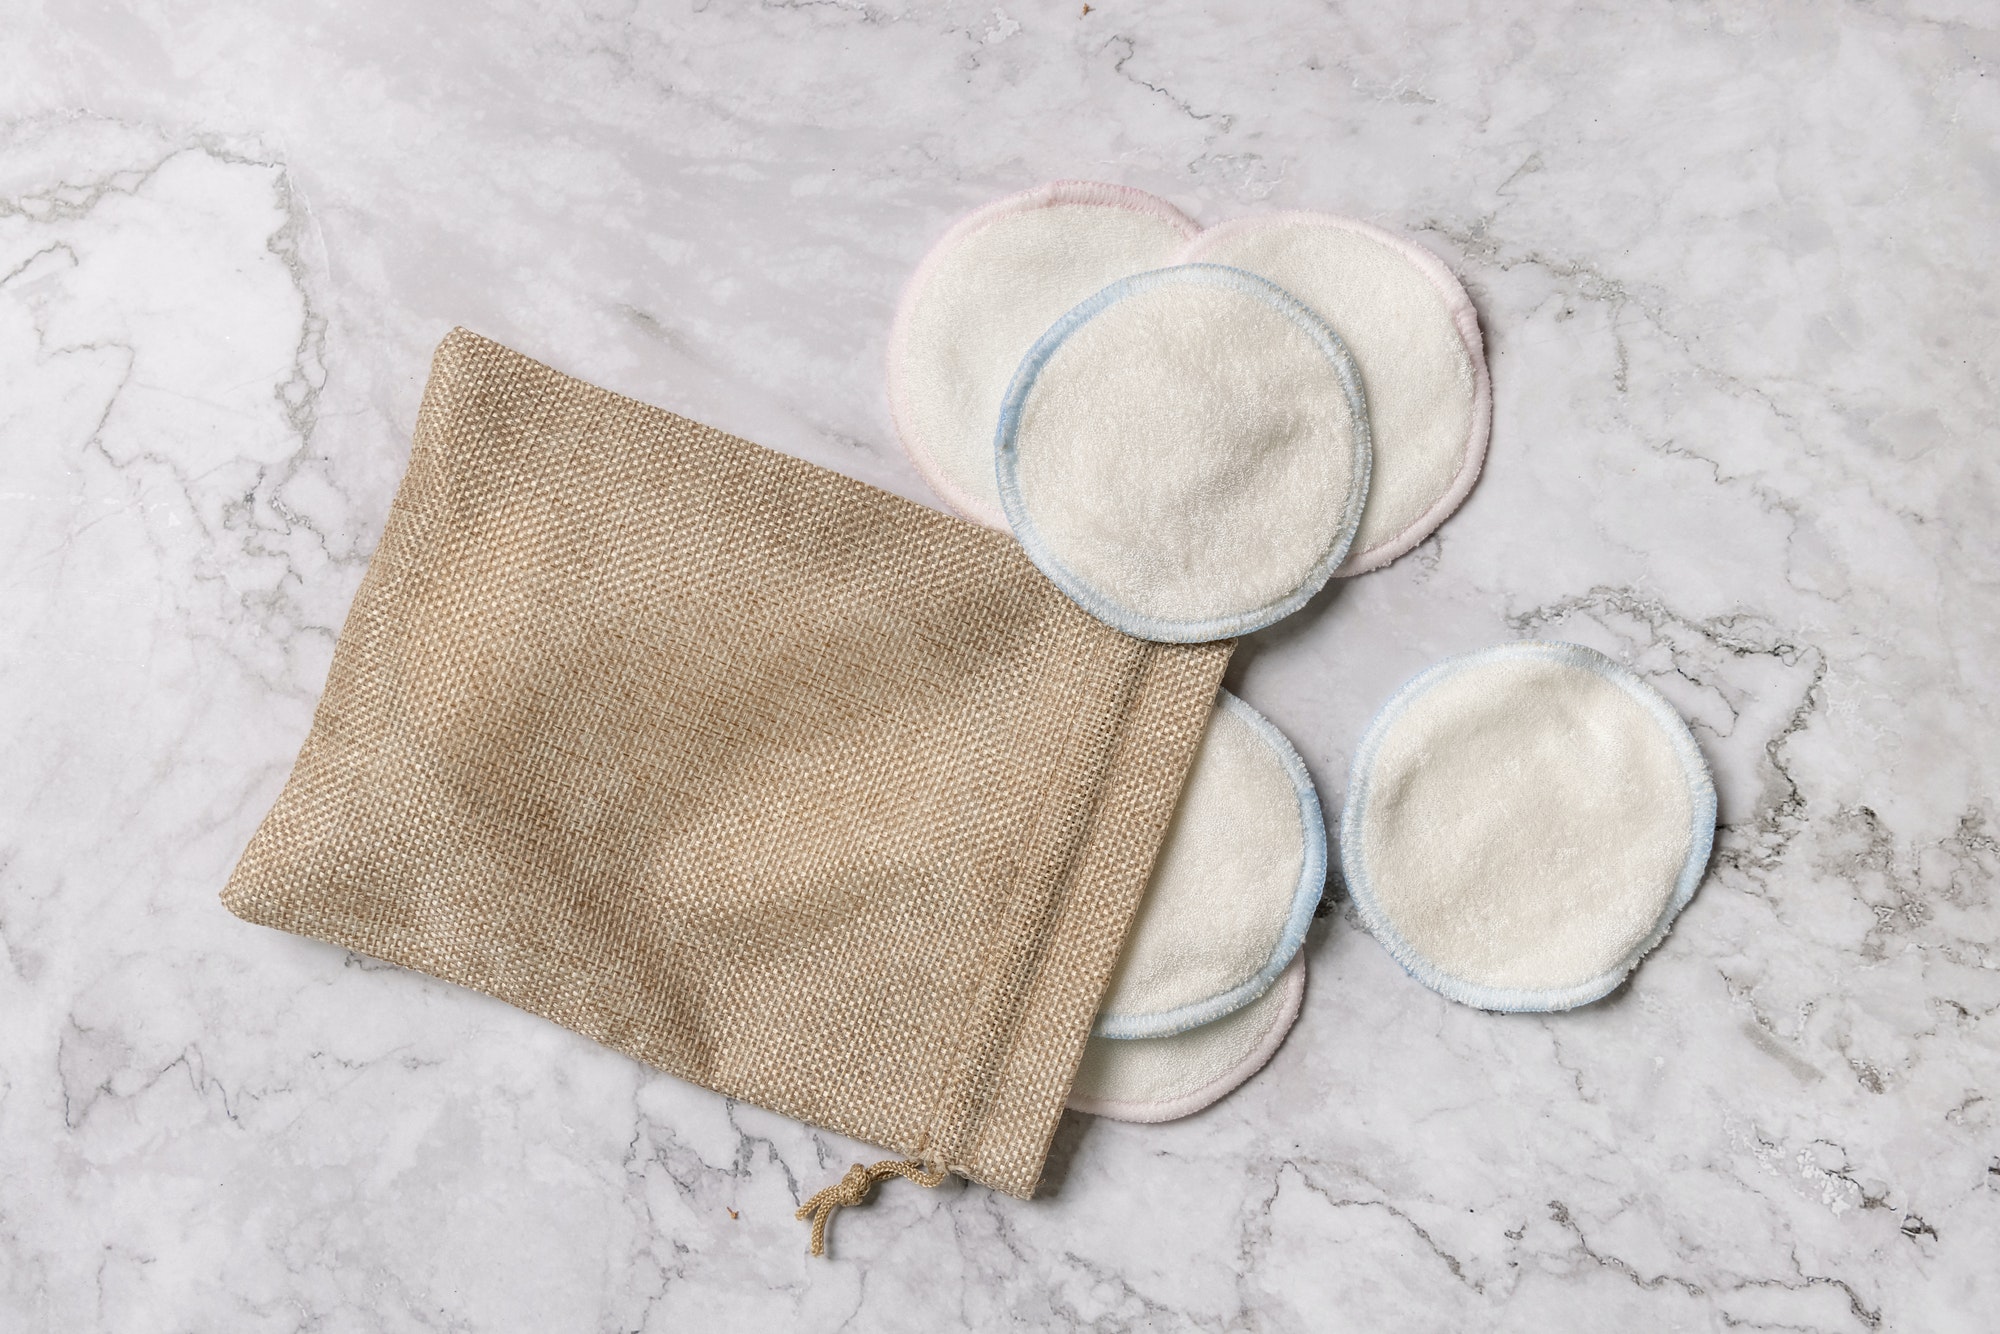 Eco friendly reusable make-up remover pads in a bag